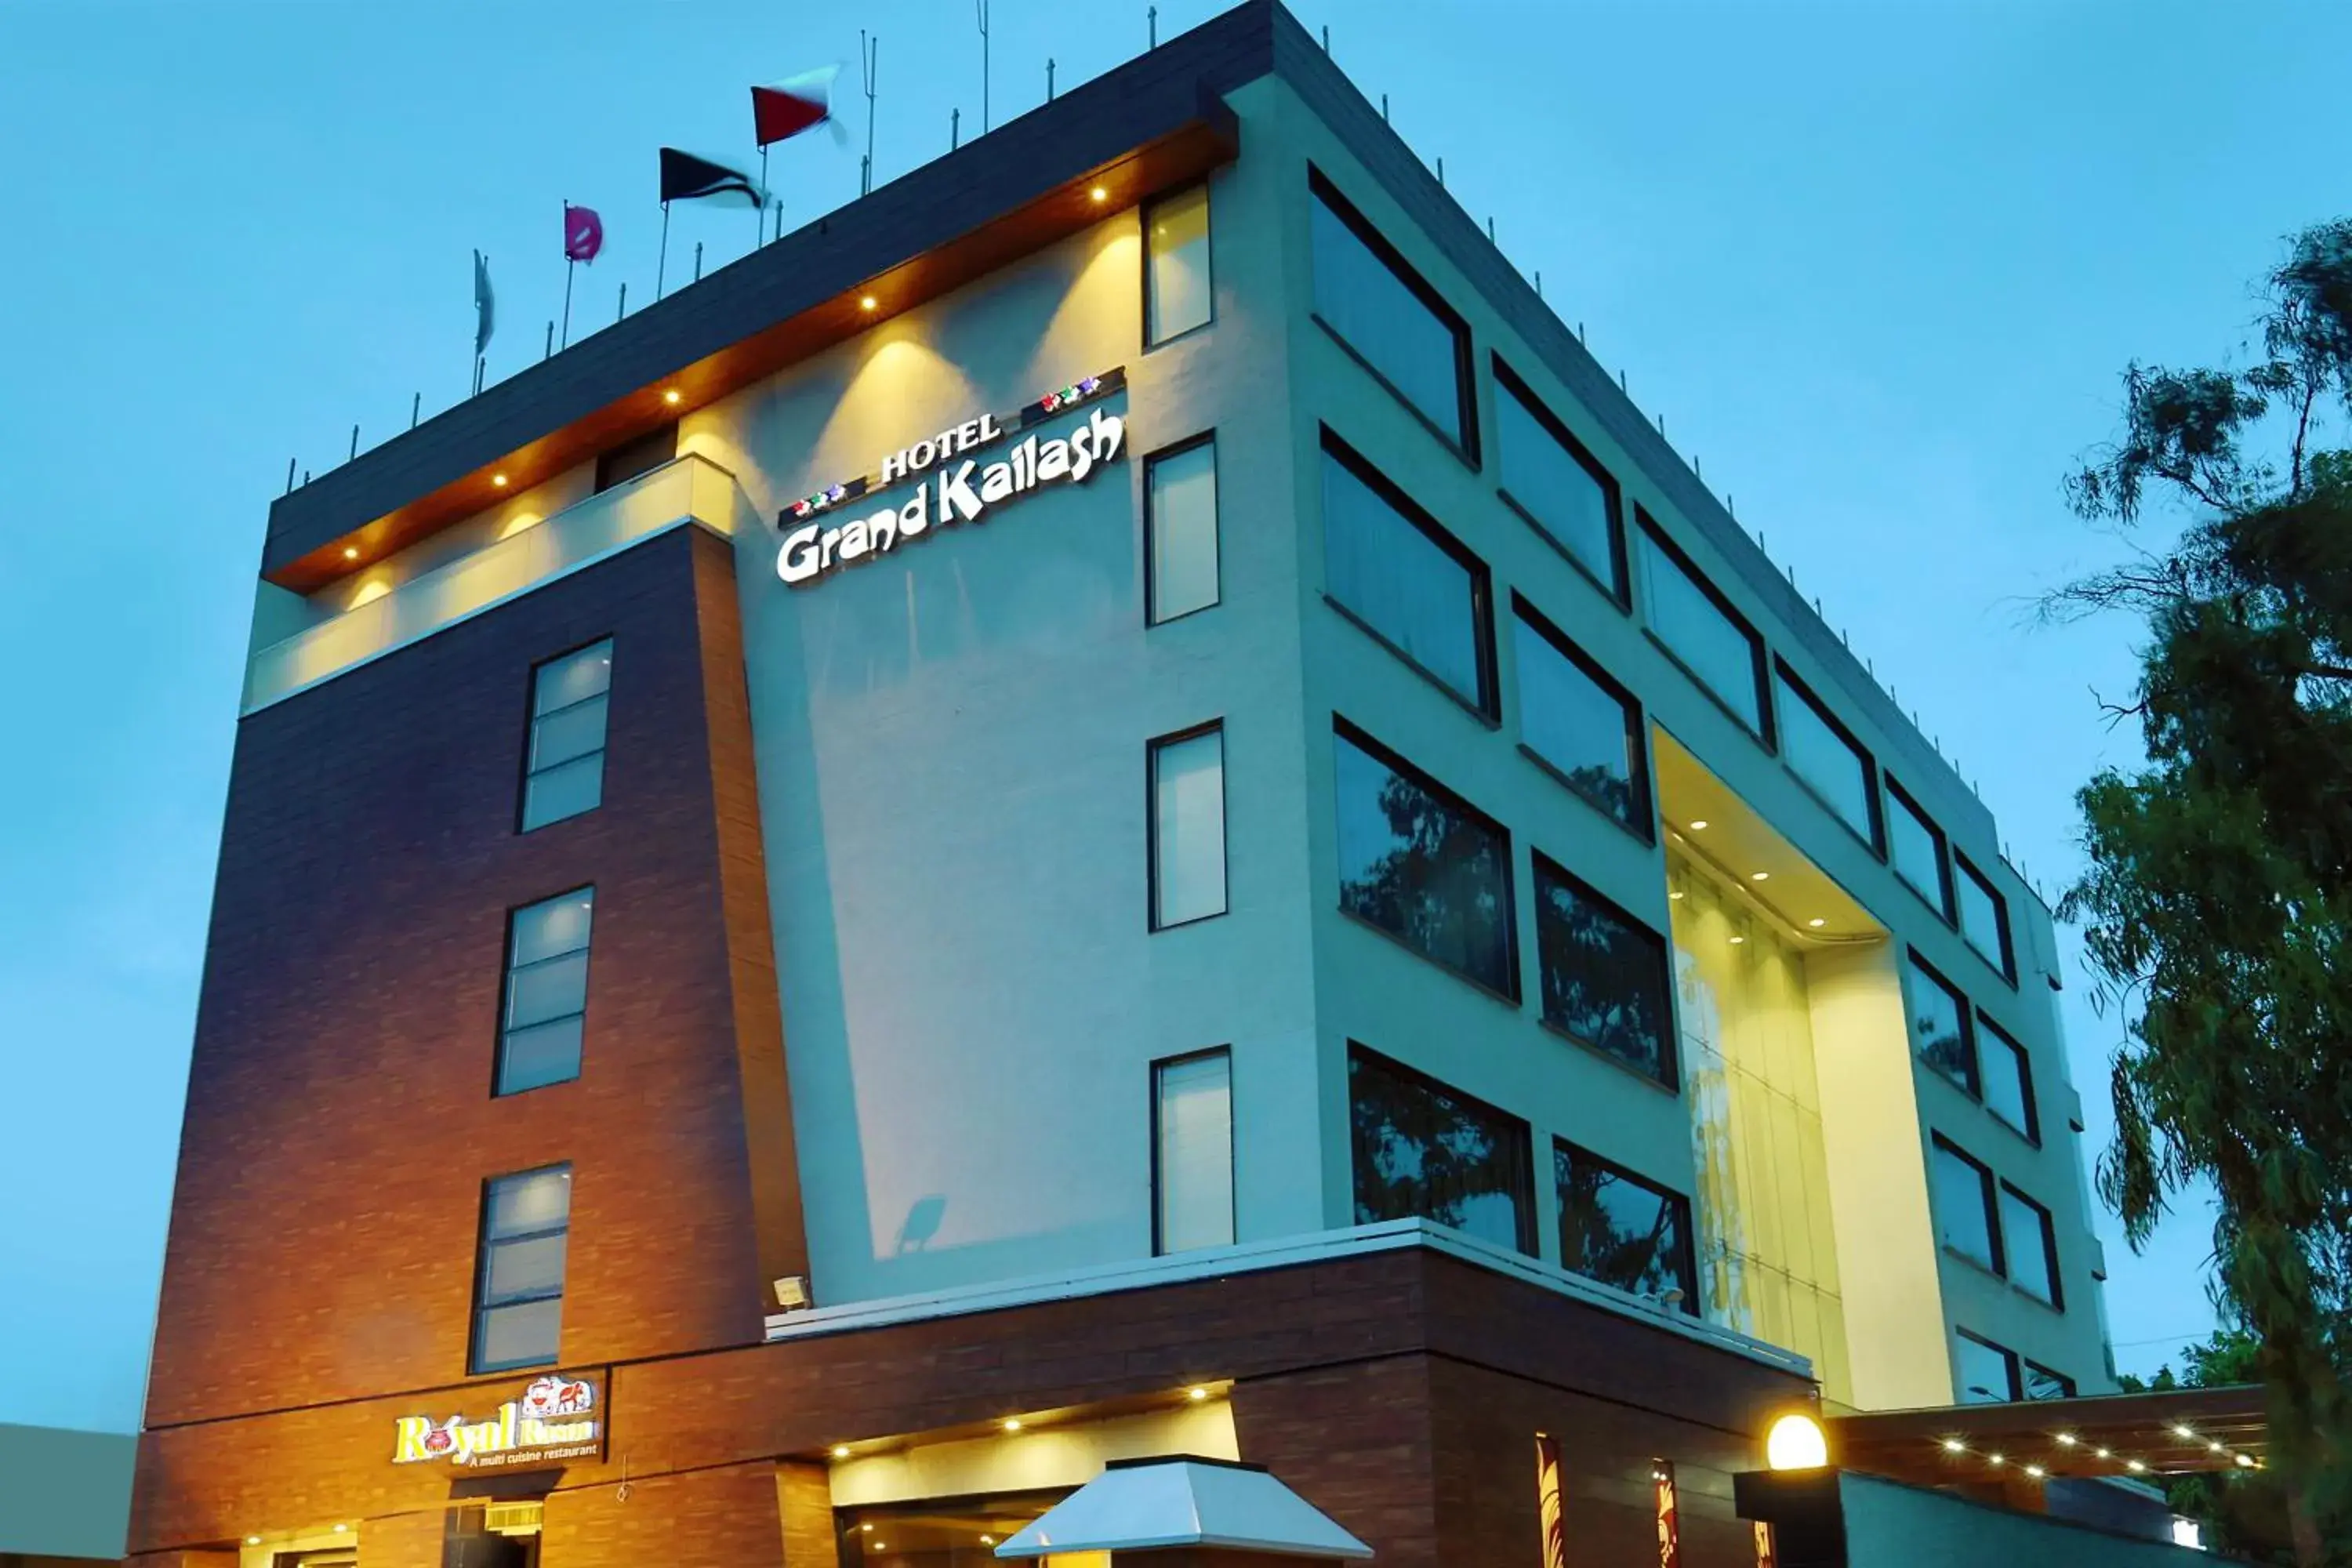 Property Building in Hotel Grand Kailash